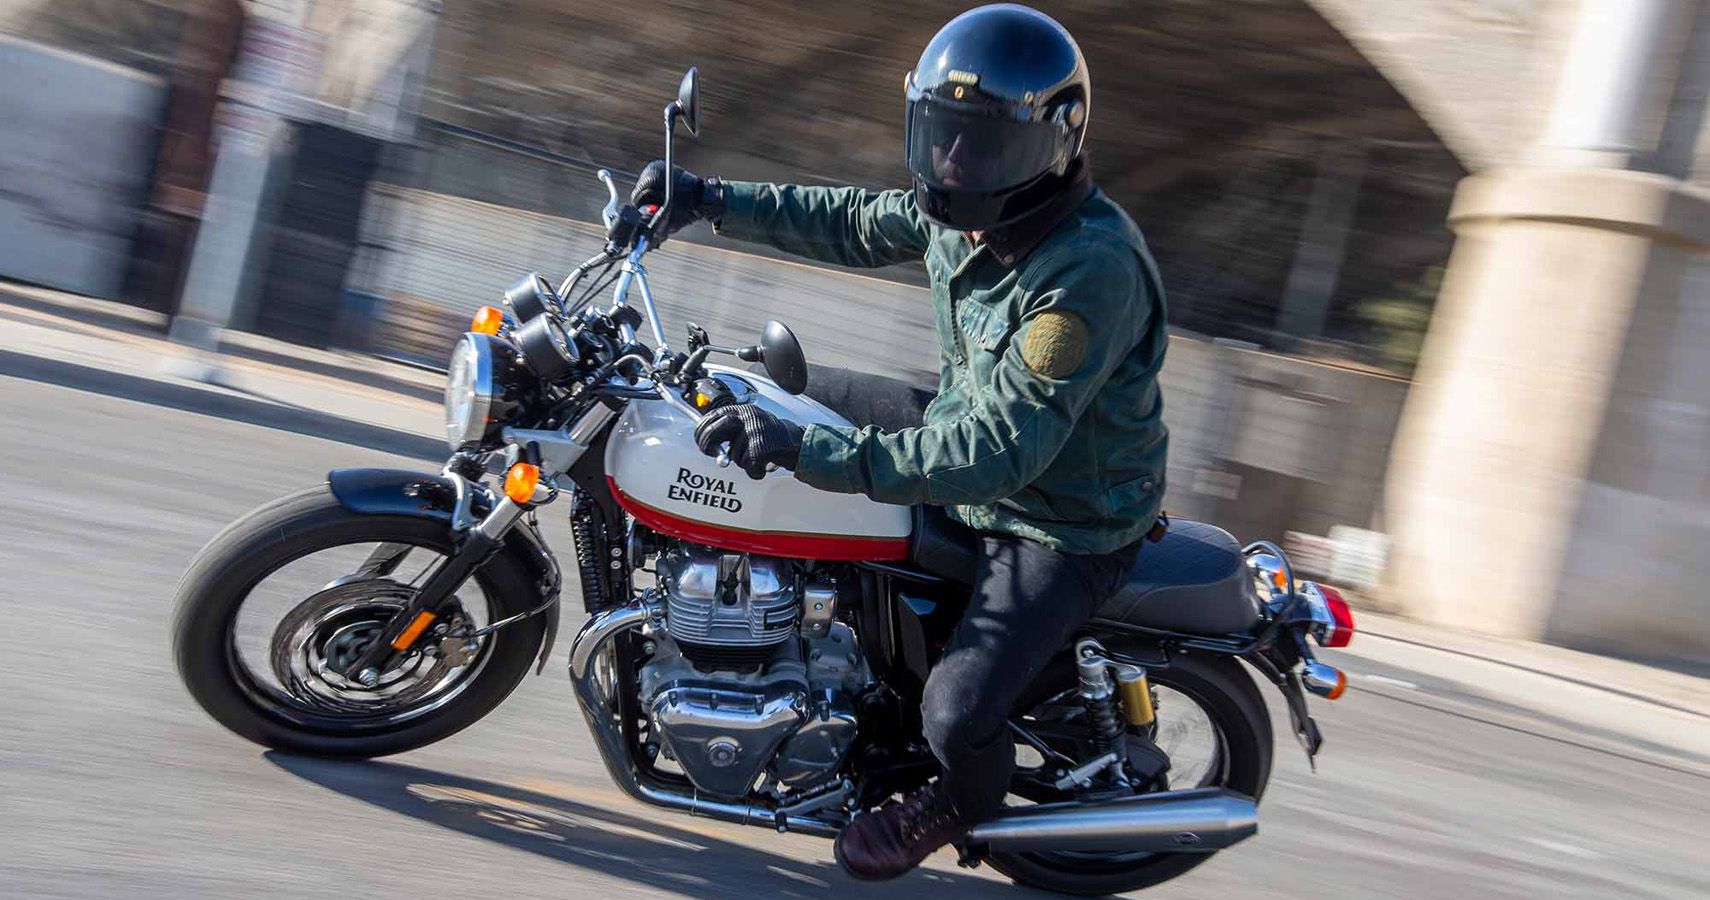 Why The Royal Enfield Interceptor 650 Is The Best Motorcycle Under $6,000